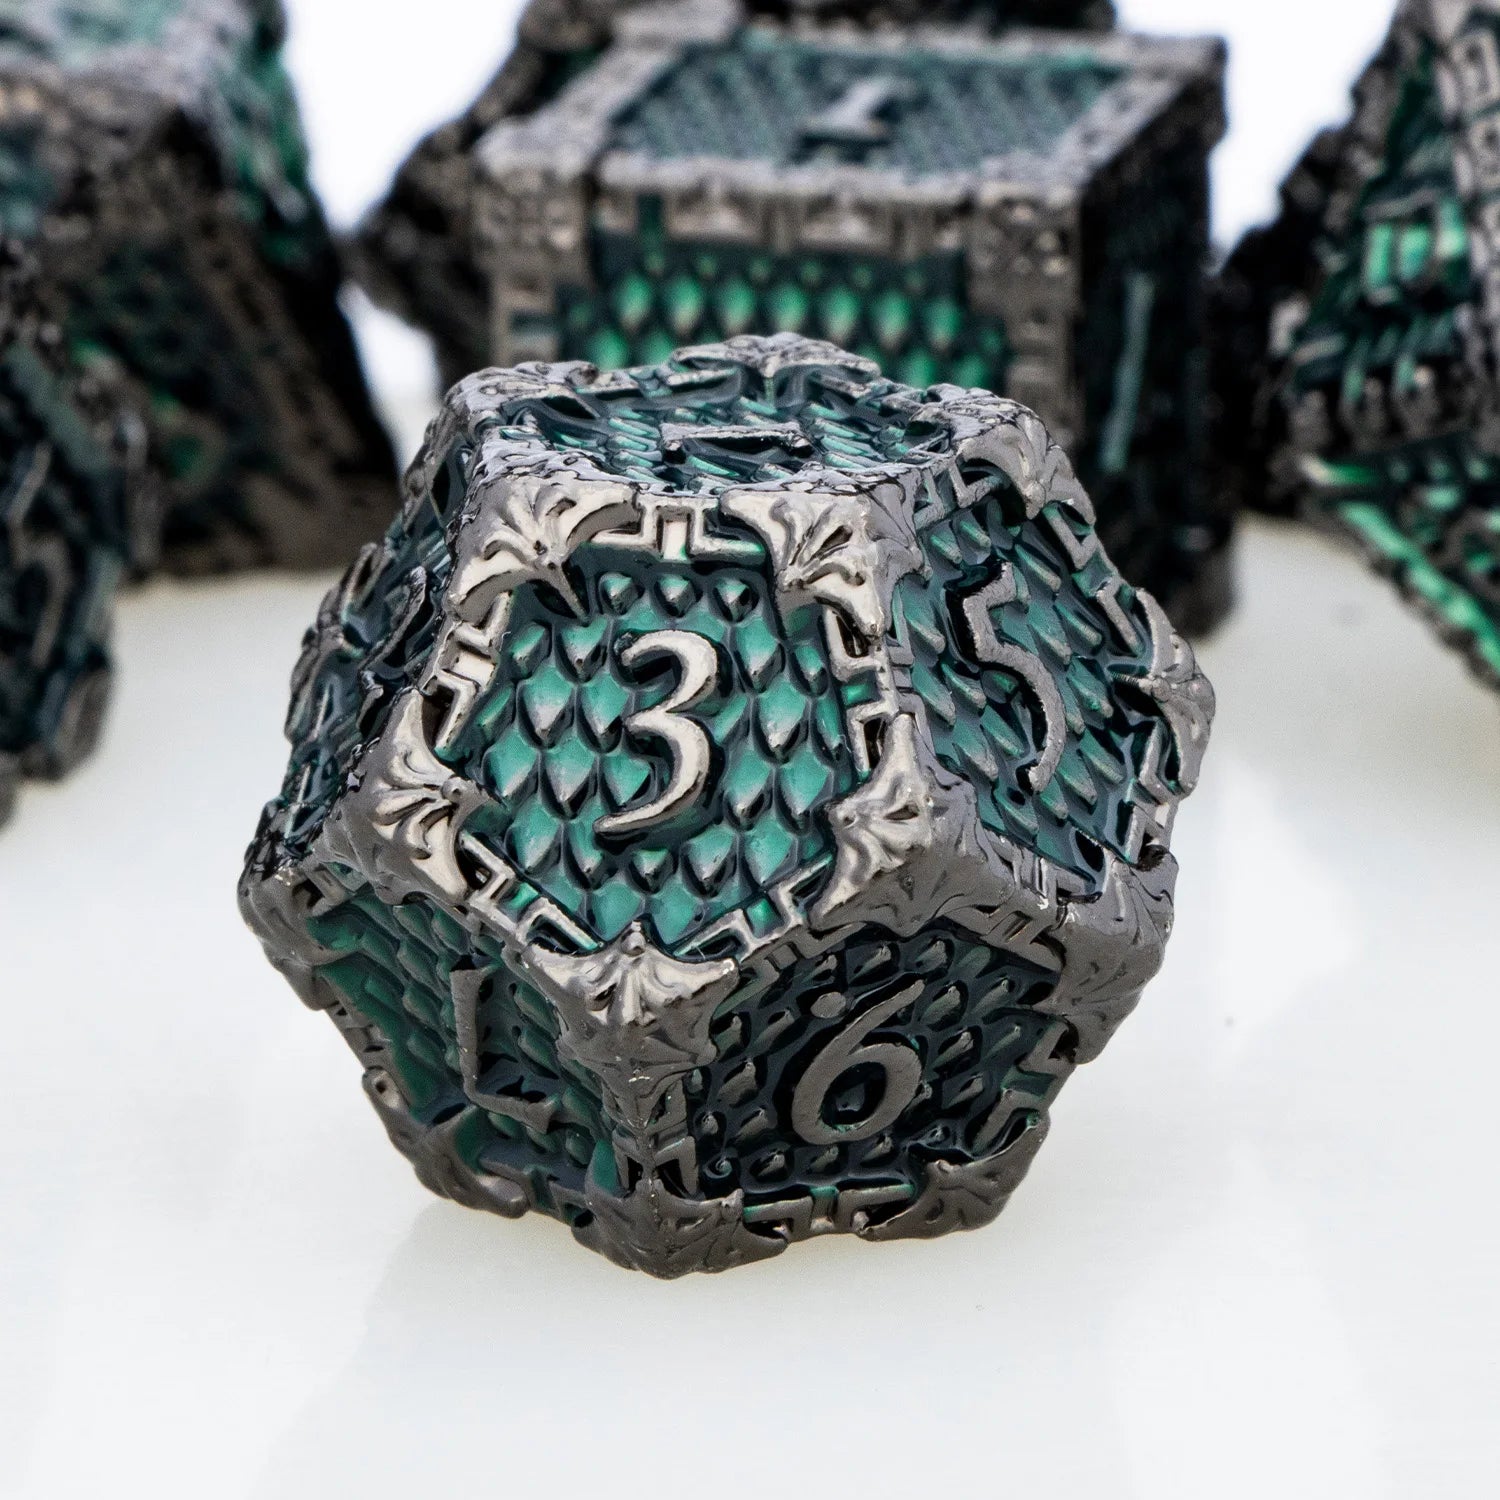 DND Metal Dice Set Dragon Scale D&D Dice Dungeon and Dragon Role Playing Games Black Green Polyhedral Dice RPG D and D Dice